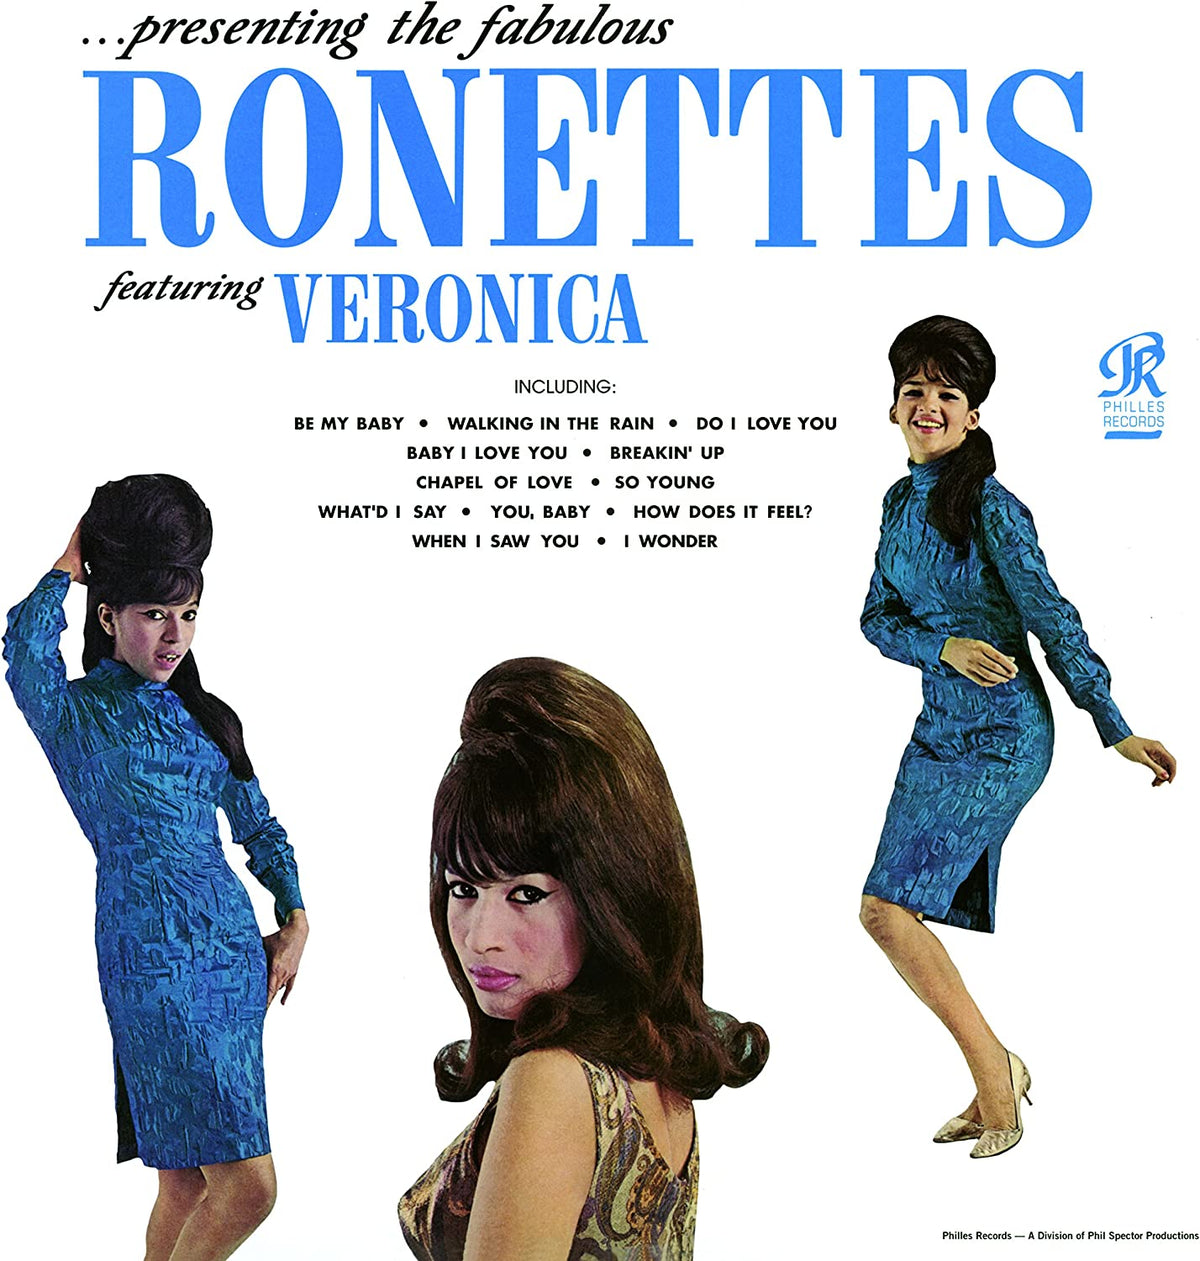 The Ronettes Featuring Veronica – Presenting The Fabulous Ronettes Featuring Veronica